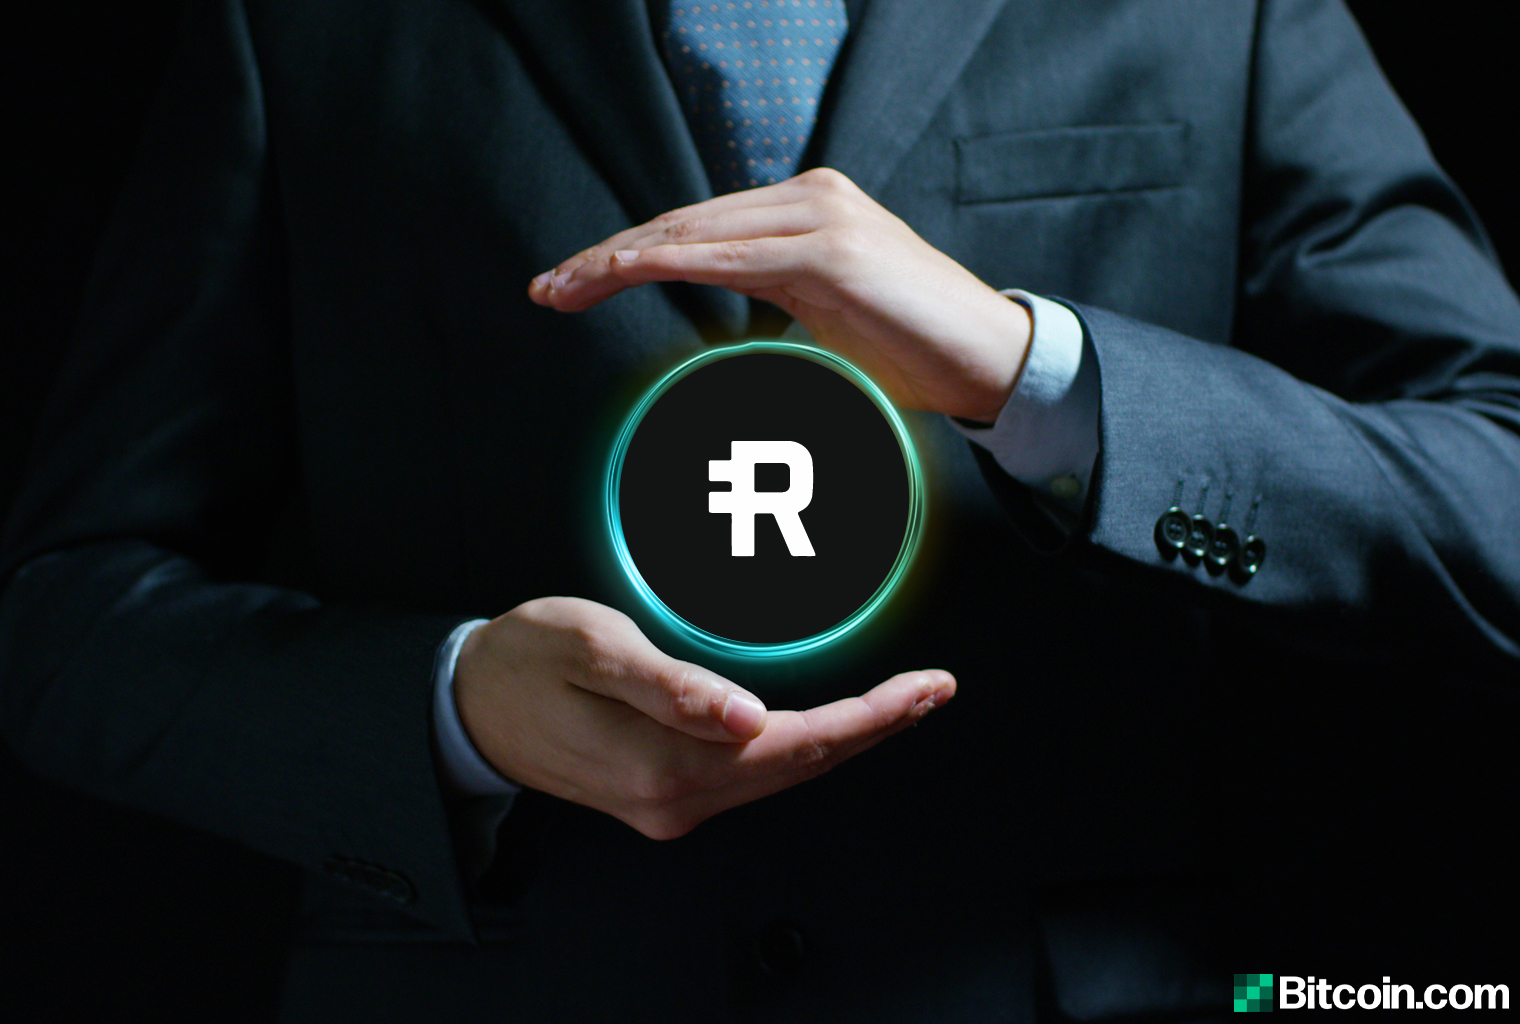 Bitcoin.com Exchange Now Supports Reserve Stablecoin RSV and the Utility Token RSR